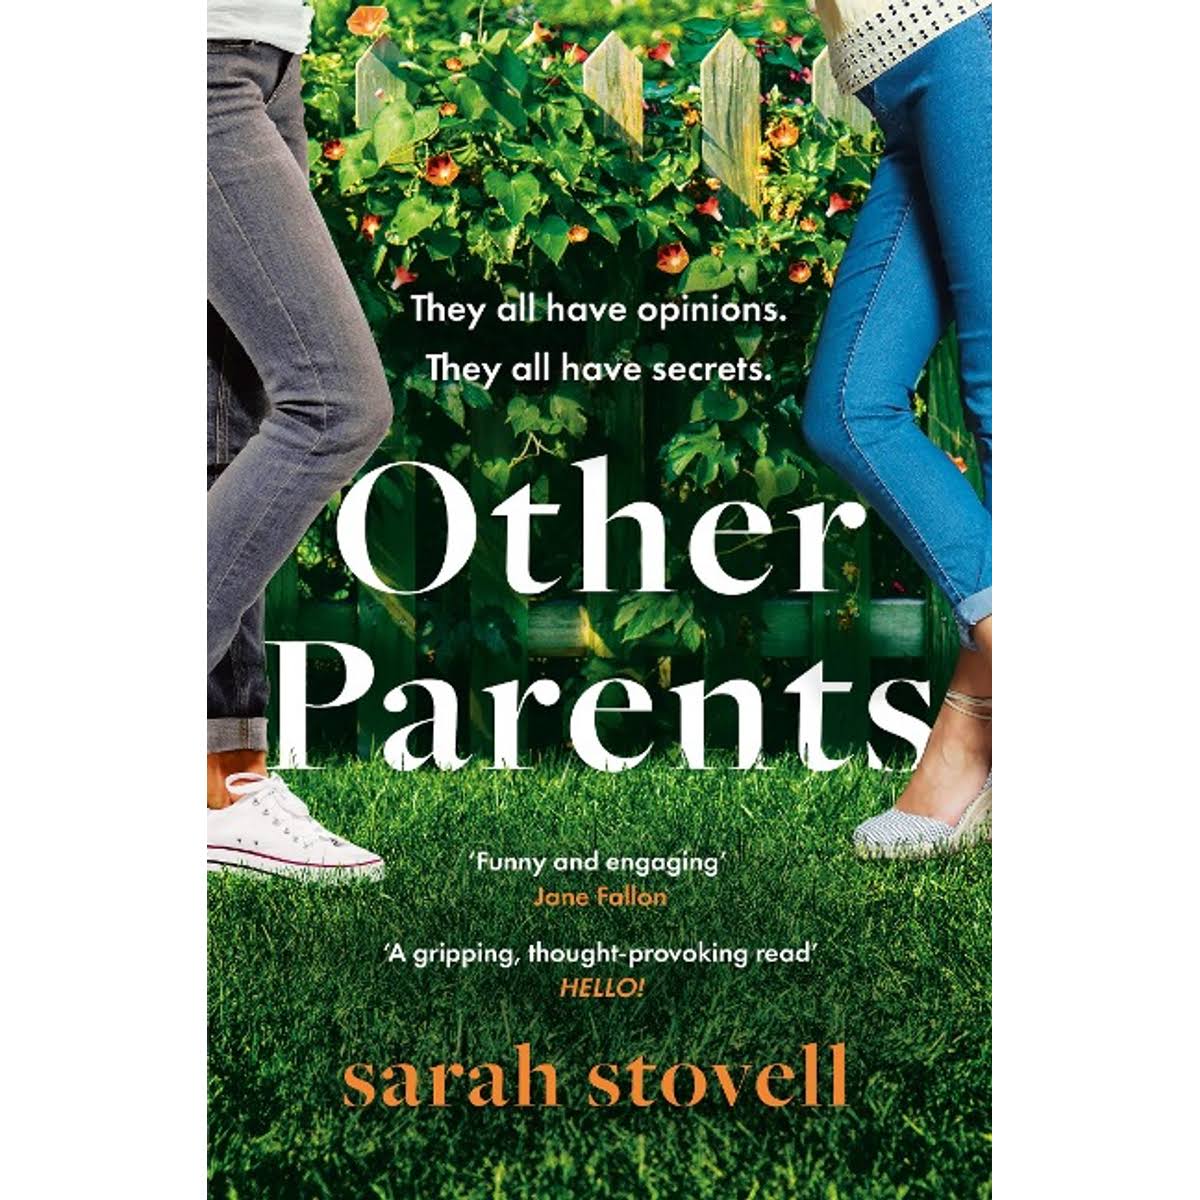 Other Parents [Book]